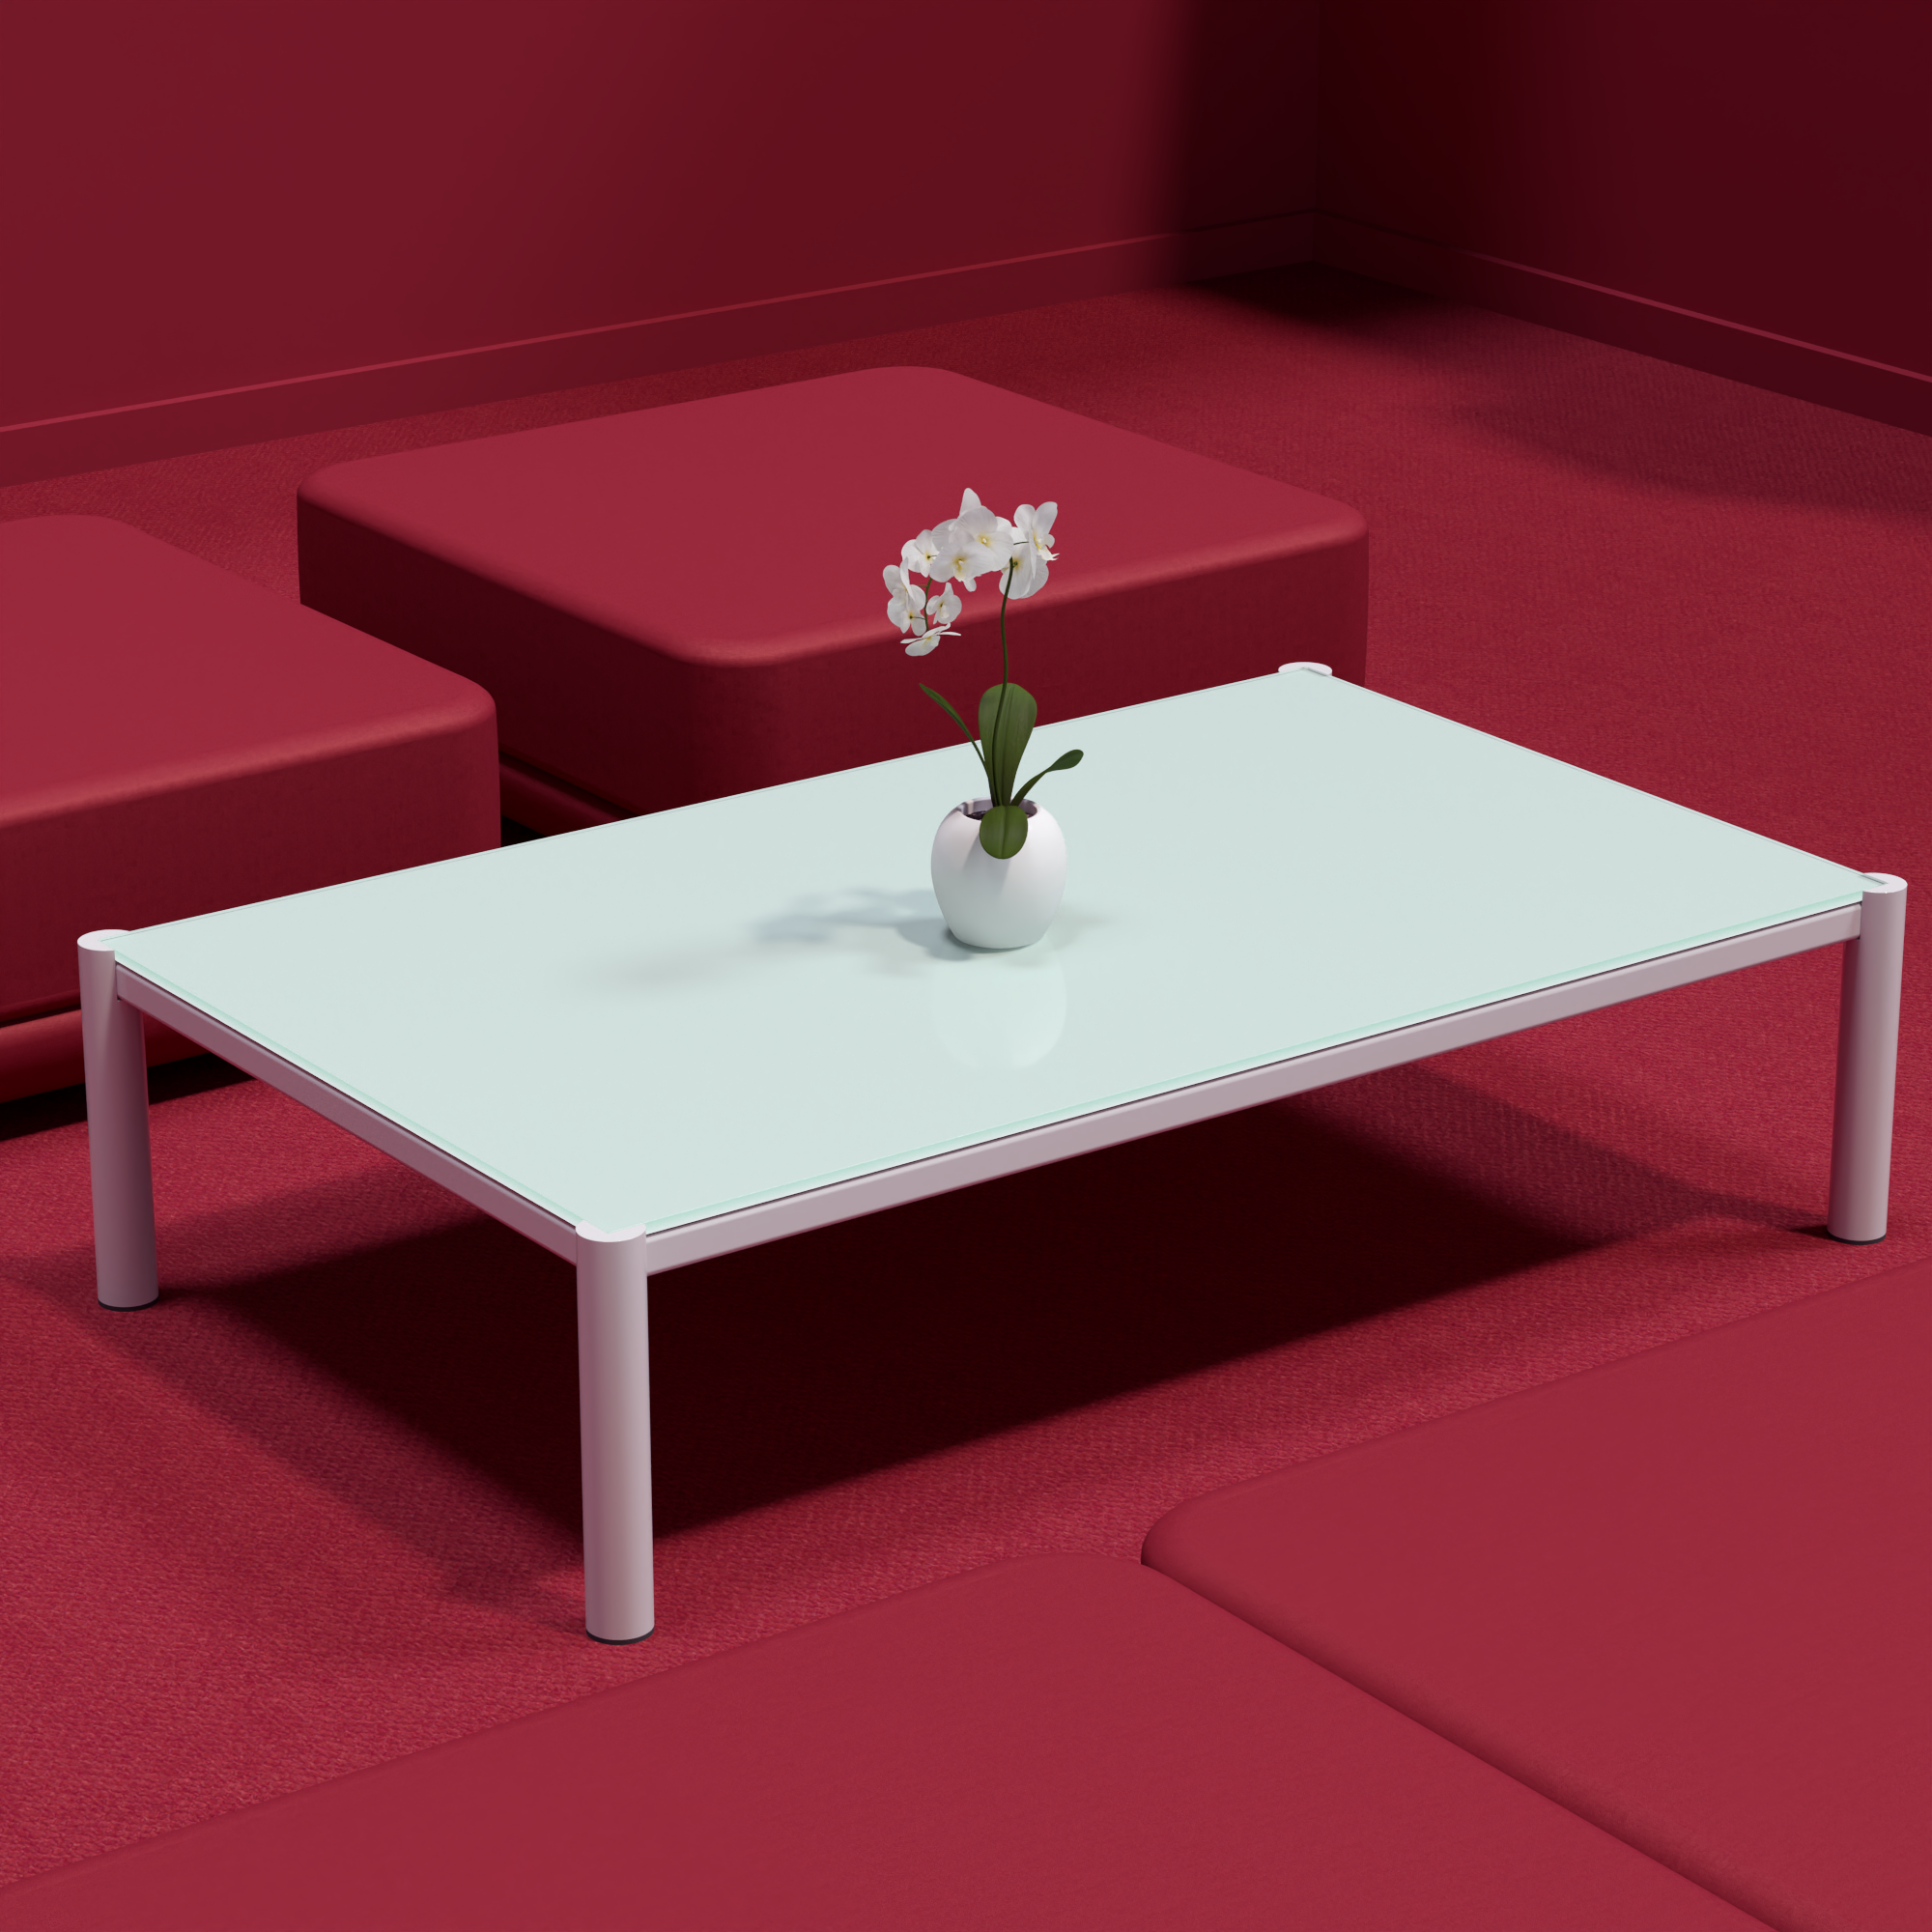 Introducing our new Together Coffee Tables